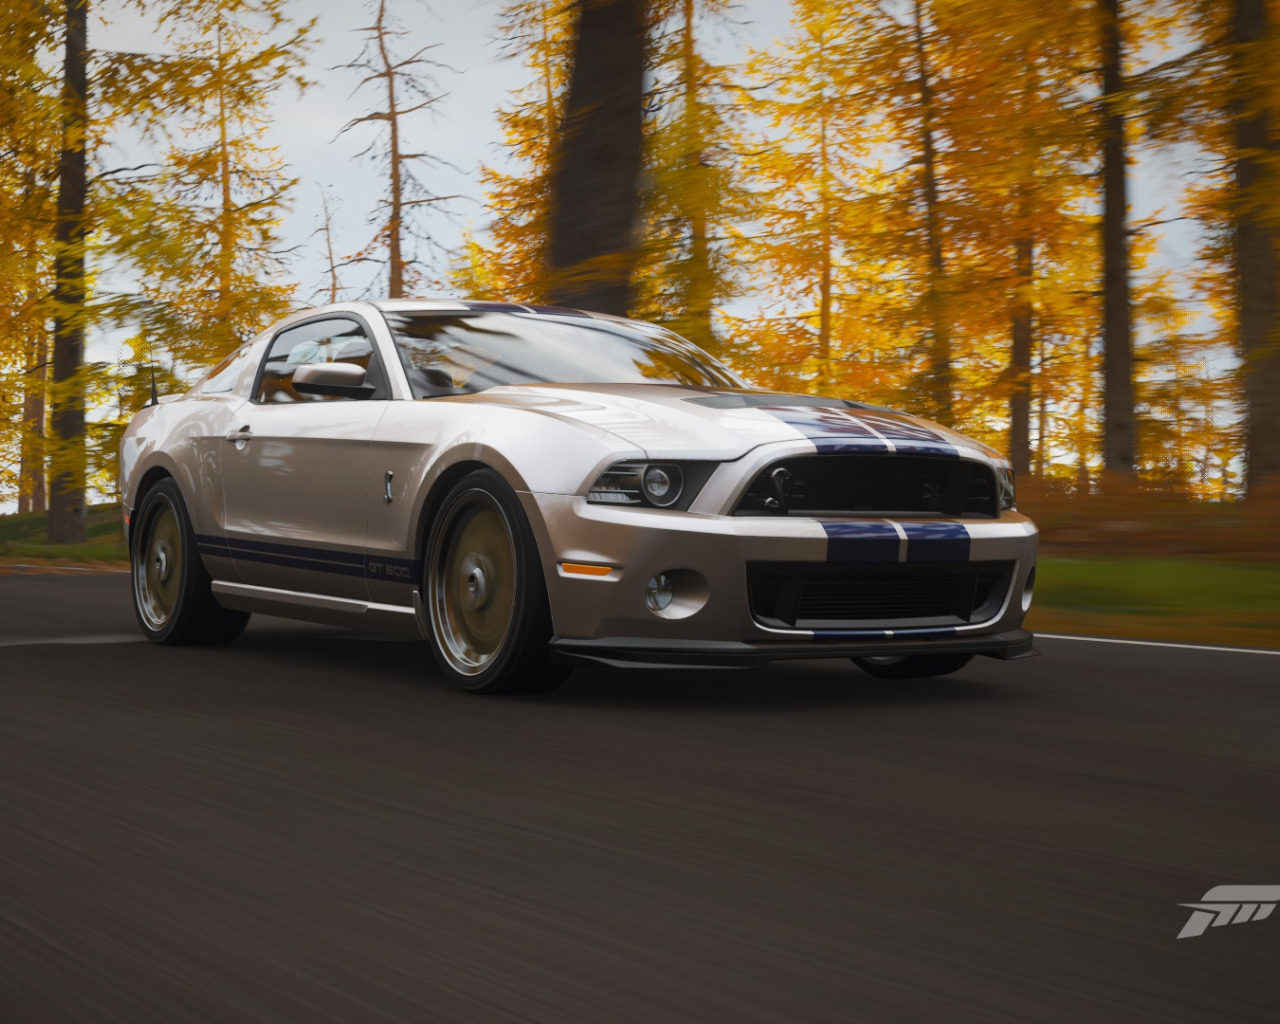 Forza horizon 4 ford. Ford Shelby gt500. Форд Мустанг ГТ 500 Шелби. Ford Shelby gt500 Forza. Ford Mustang Shelby gt500 2020 Forza Horizon 4.